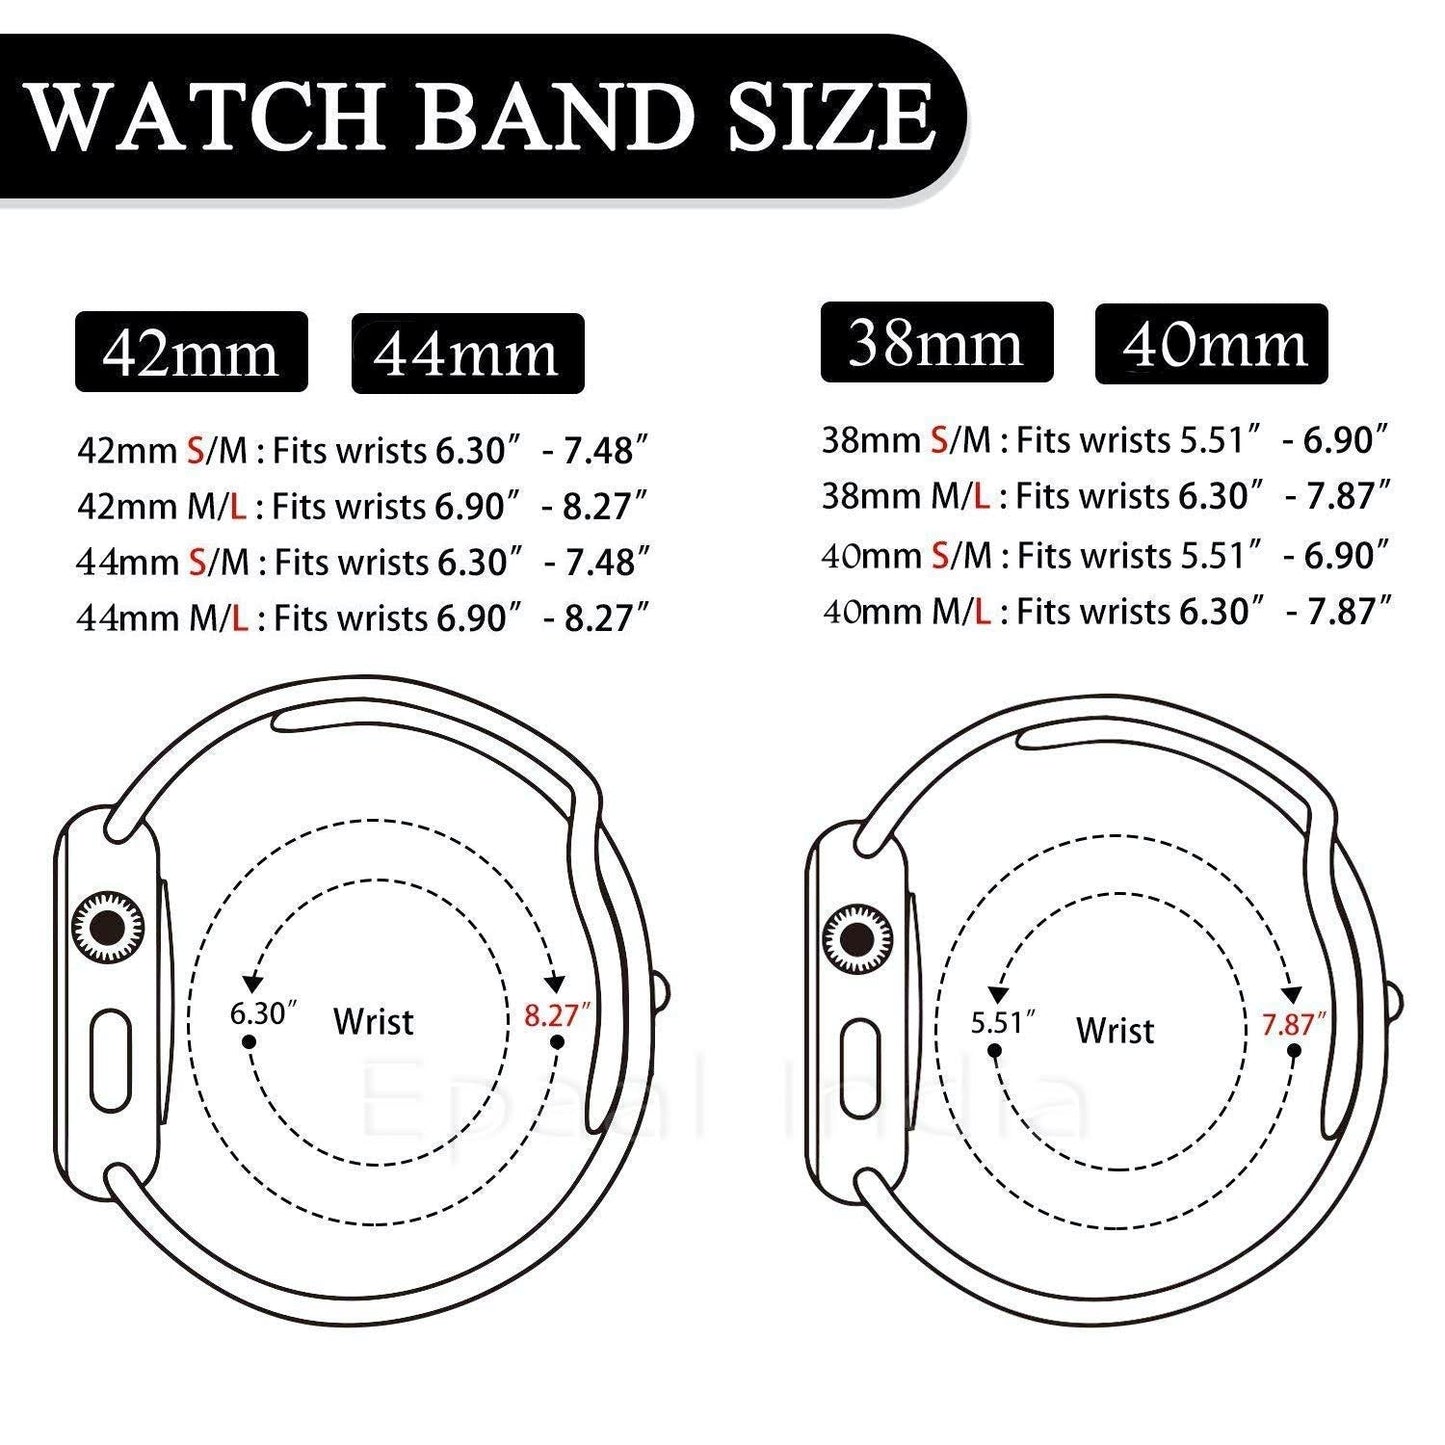 Epaal Plain Silicone Strap for Apple iWatch Series 4/5 [42mm / 44mm]